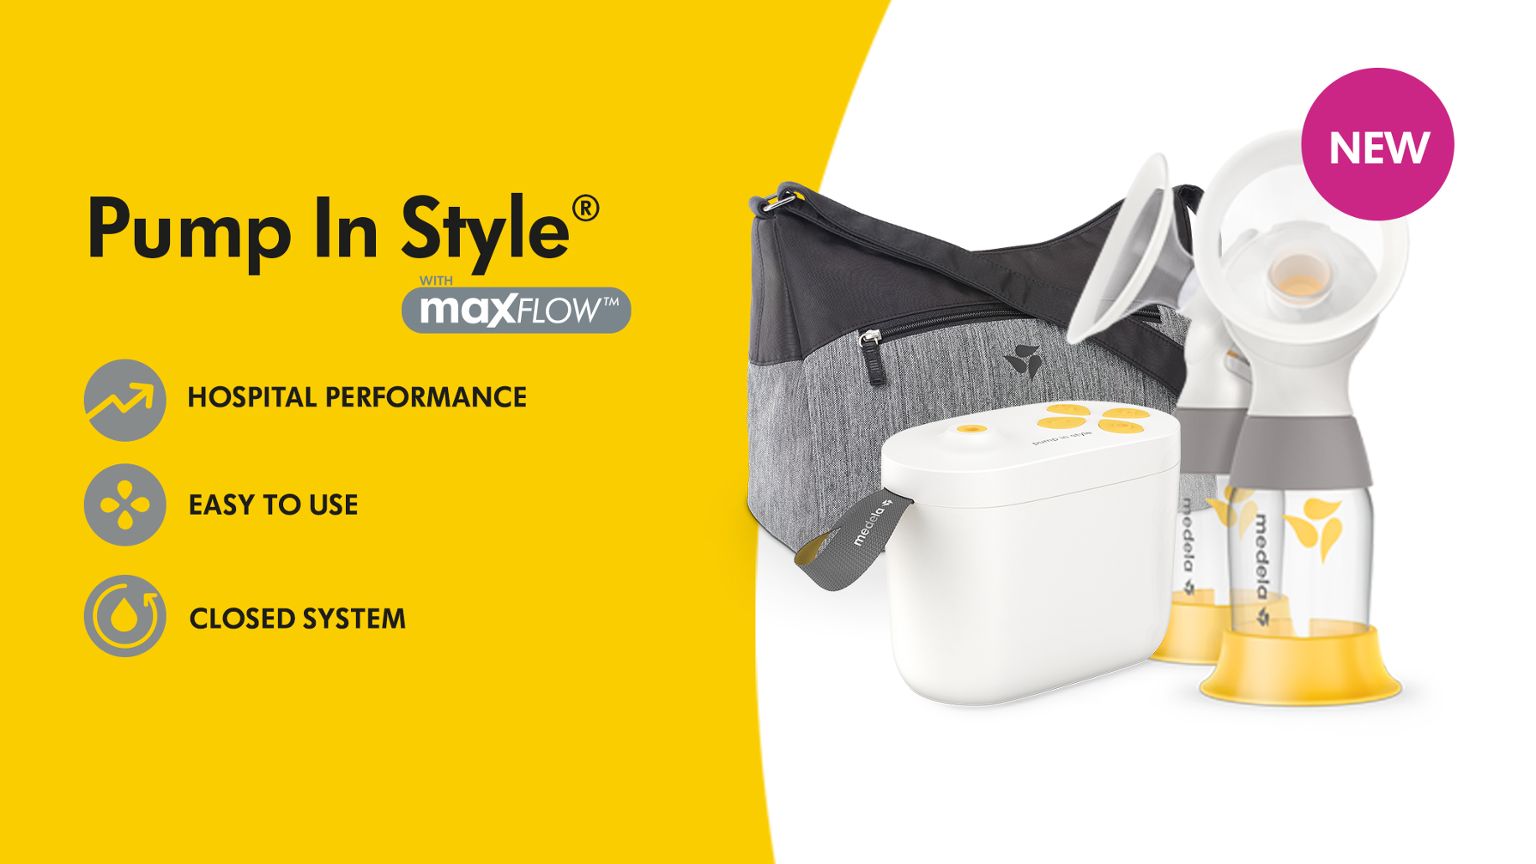 New Pump In Style® with MaxFlow™ technology is clinically proven to increase milk volume. Medela's pre-programmed pump settings based on extensive research in breastfeeding and pumping, take the guesswork out for more effective pumping to help moms when she needs it most.